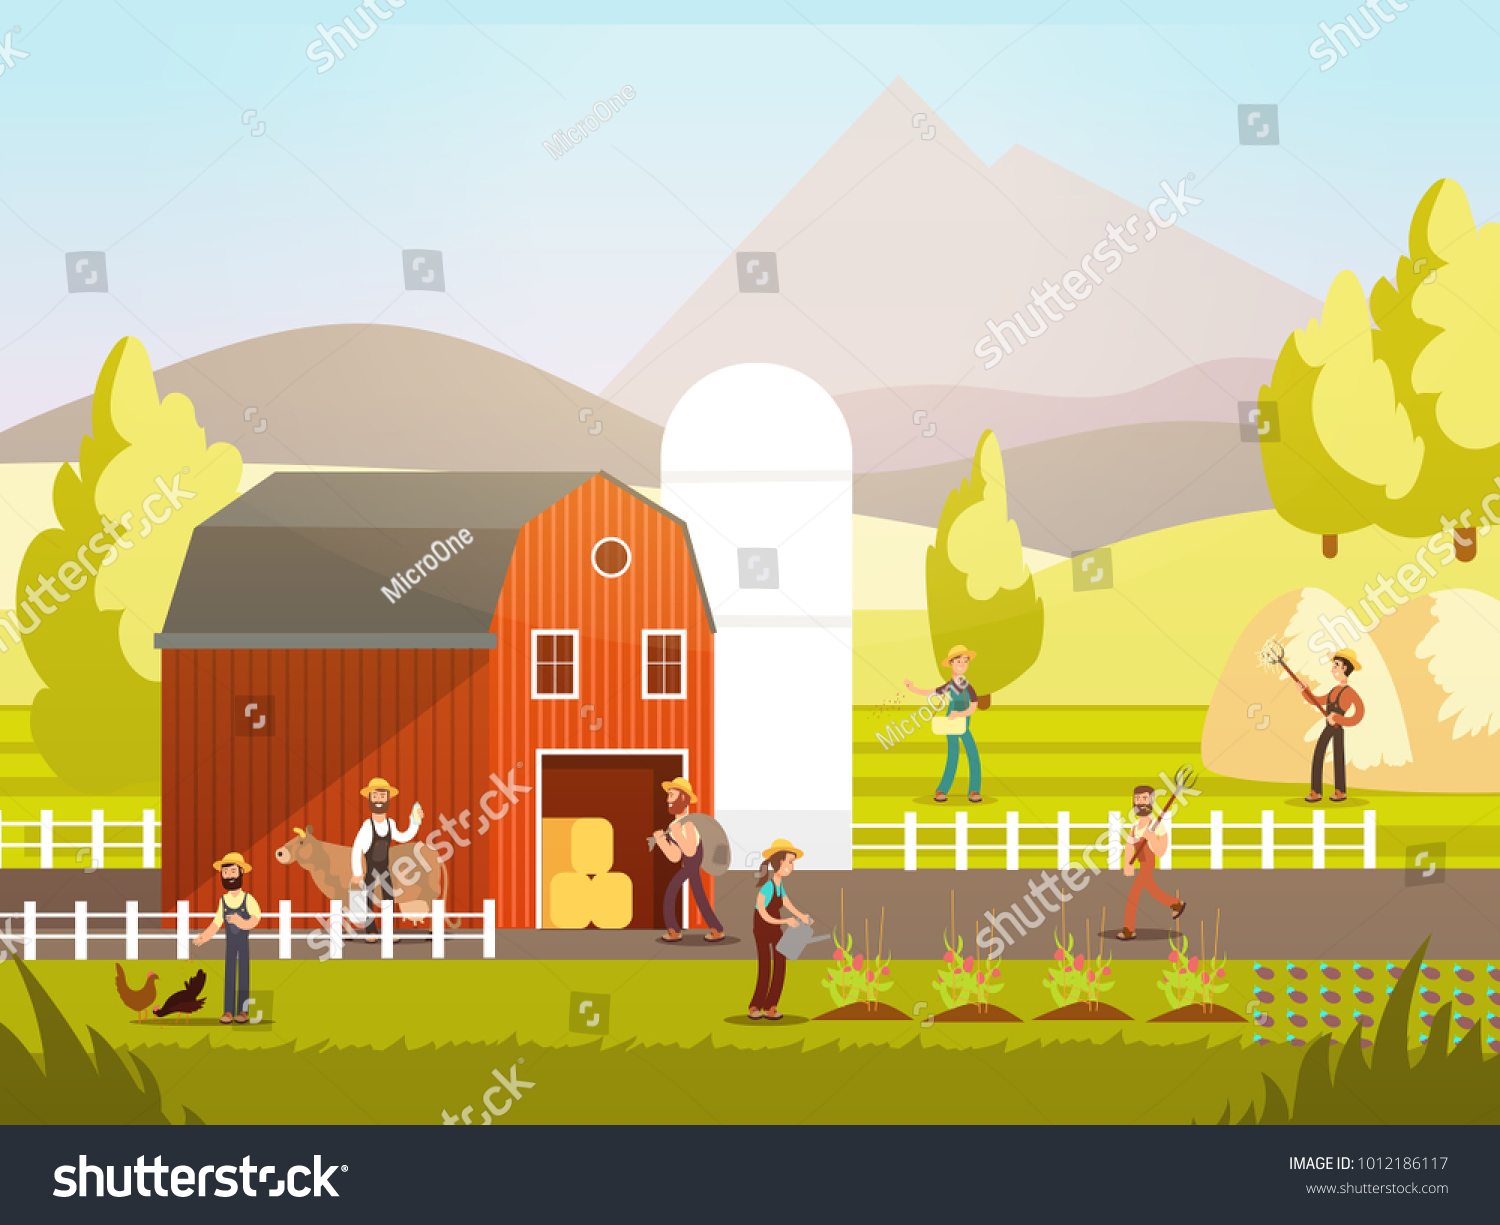 Cartoon Agriculture Images